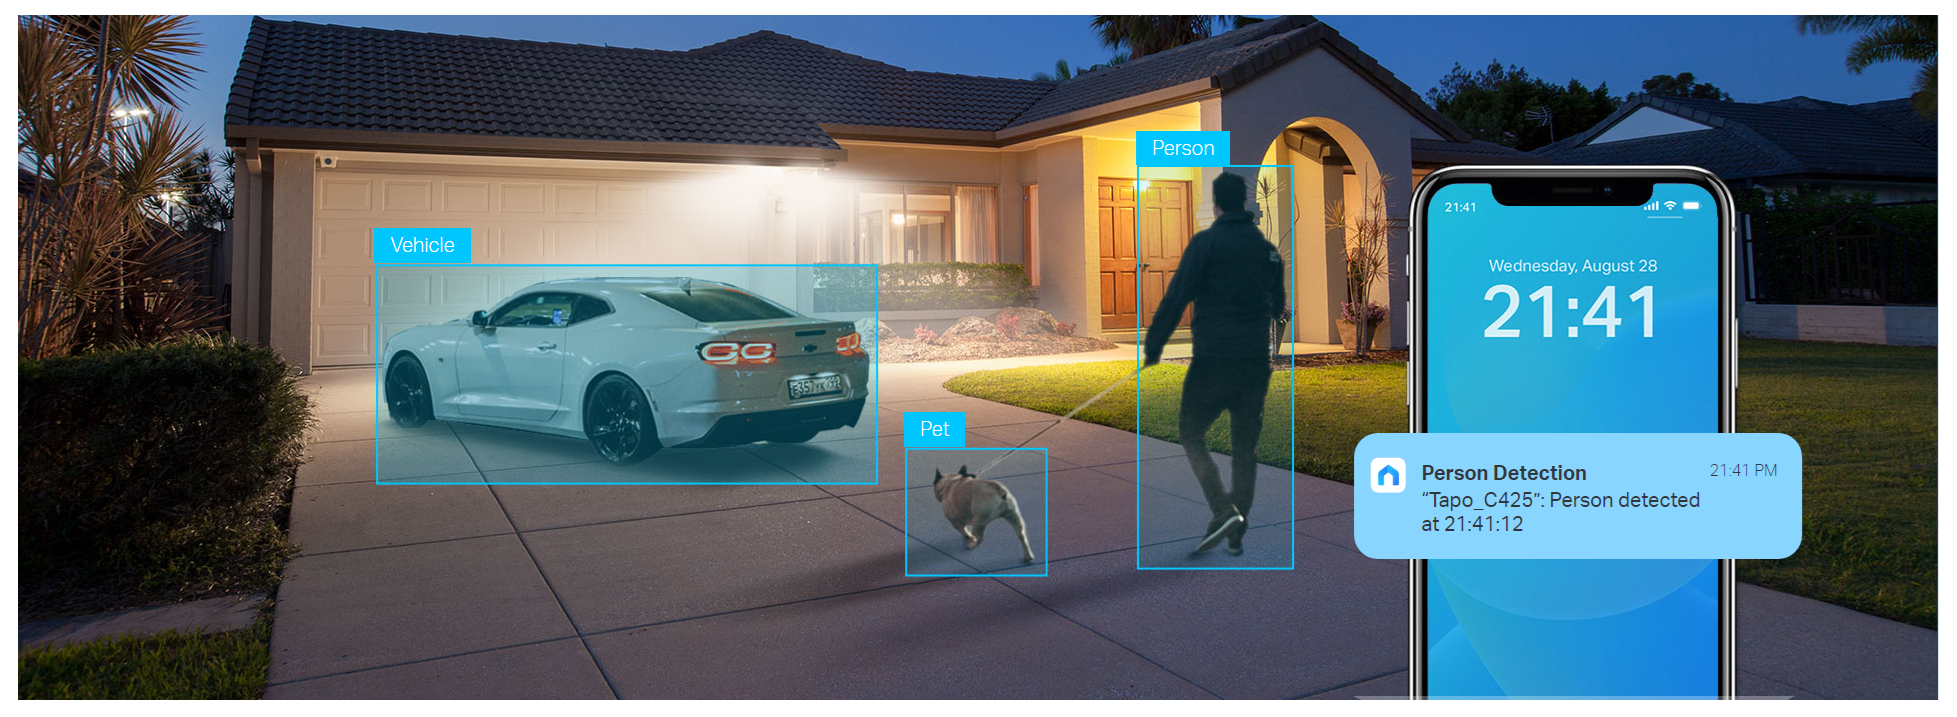 Multiple AI Detection, All for Free!
Smart AI accurately identifies people, pets, and vehicles, reducing false alerts and unnecessary notifications.